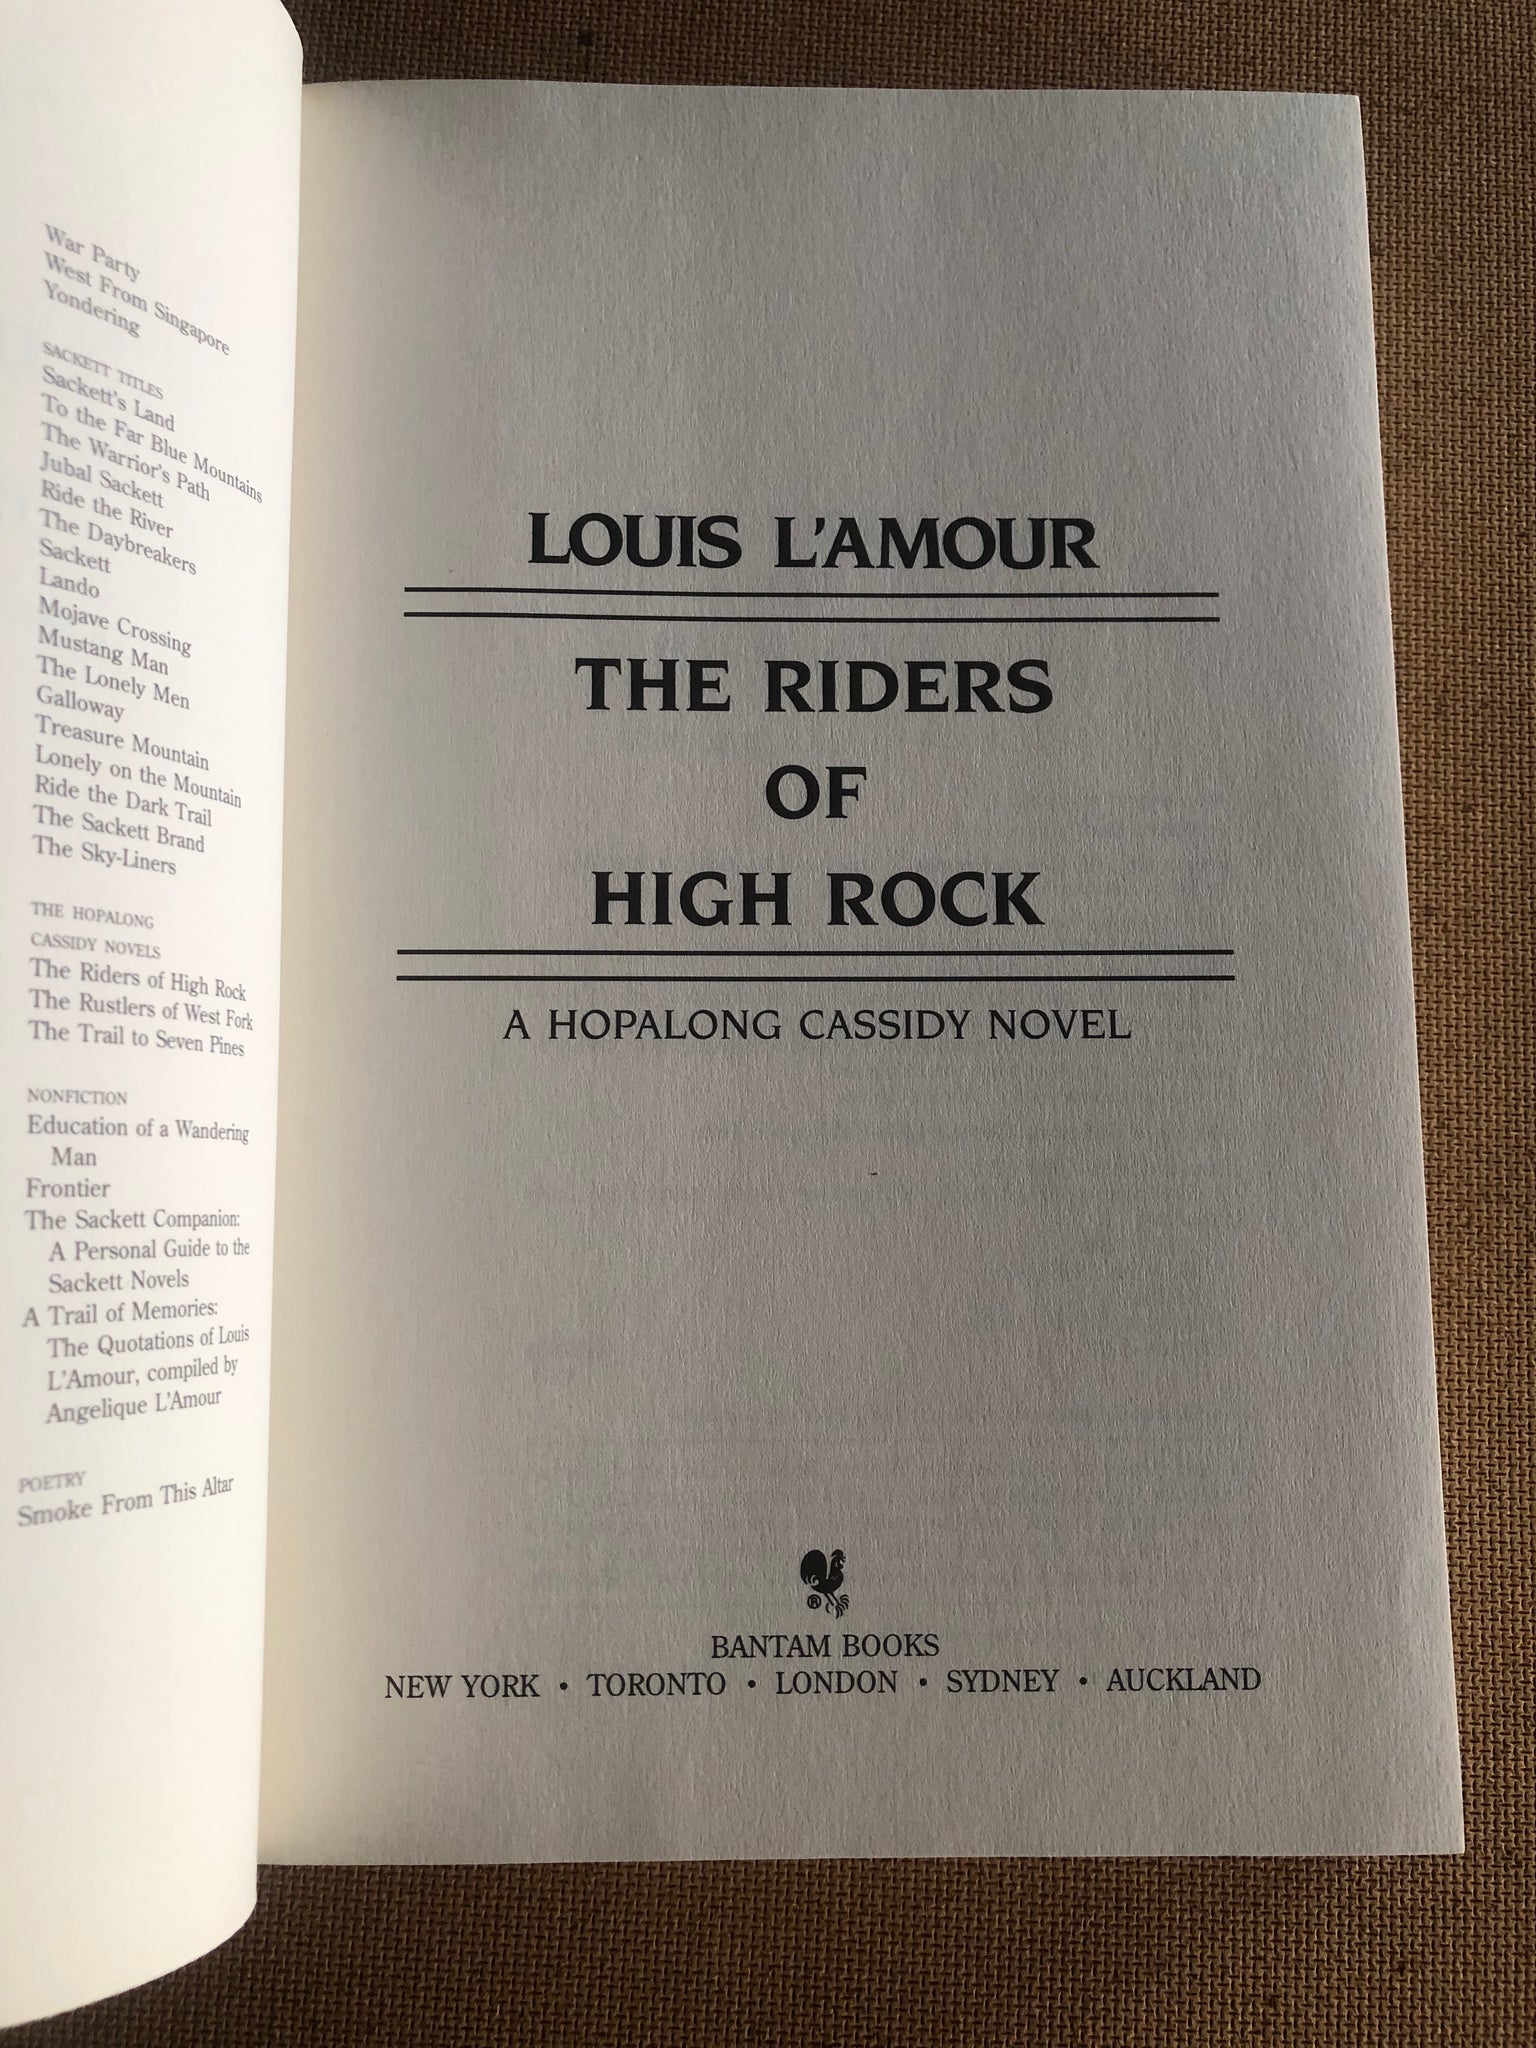 The Lonely Men From the Louis L'amour Collection 